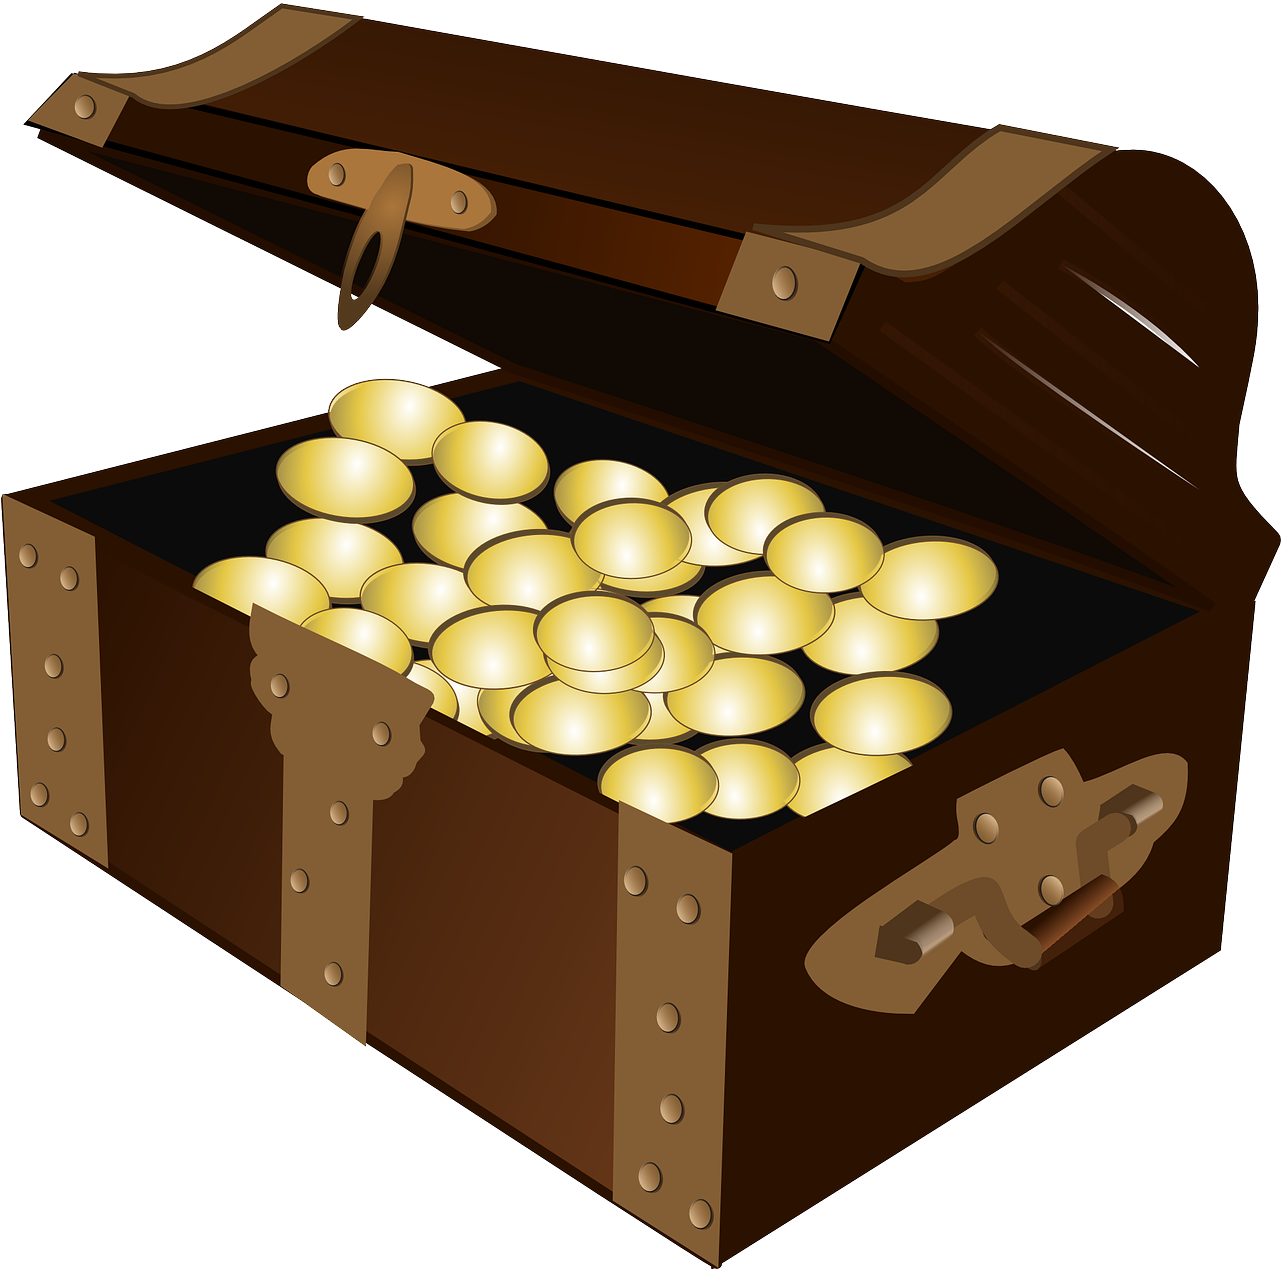 Treasure Chest Fullof Gold Coins.png PNG